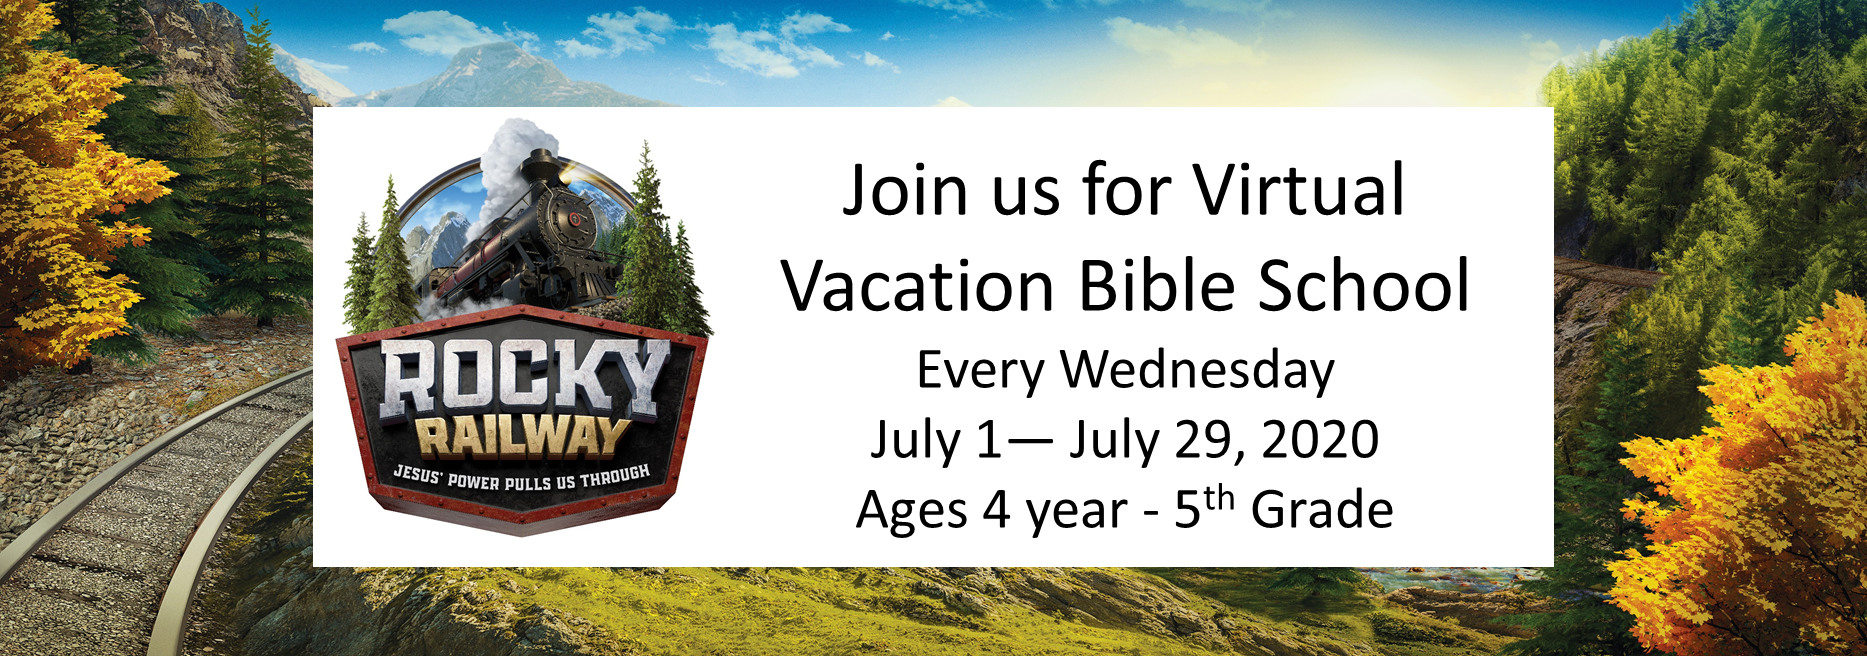 vbs page banner